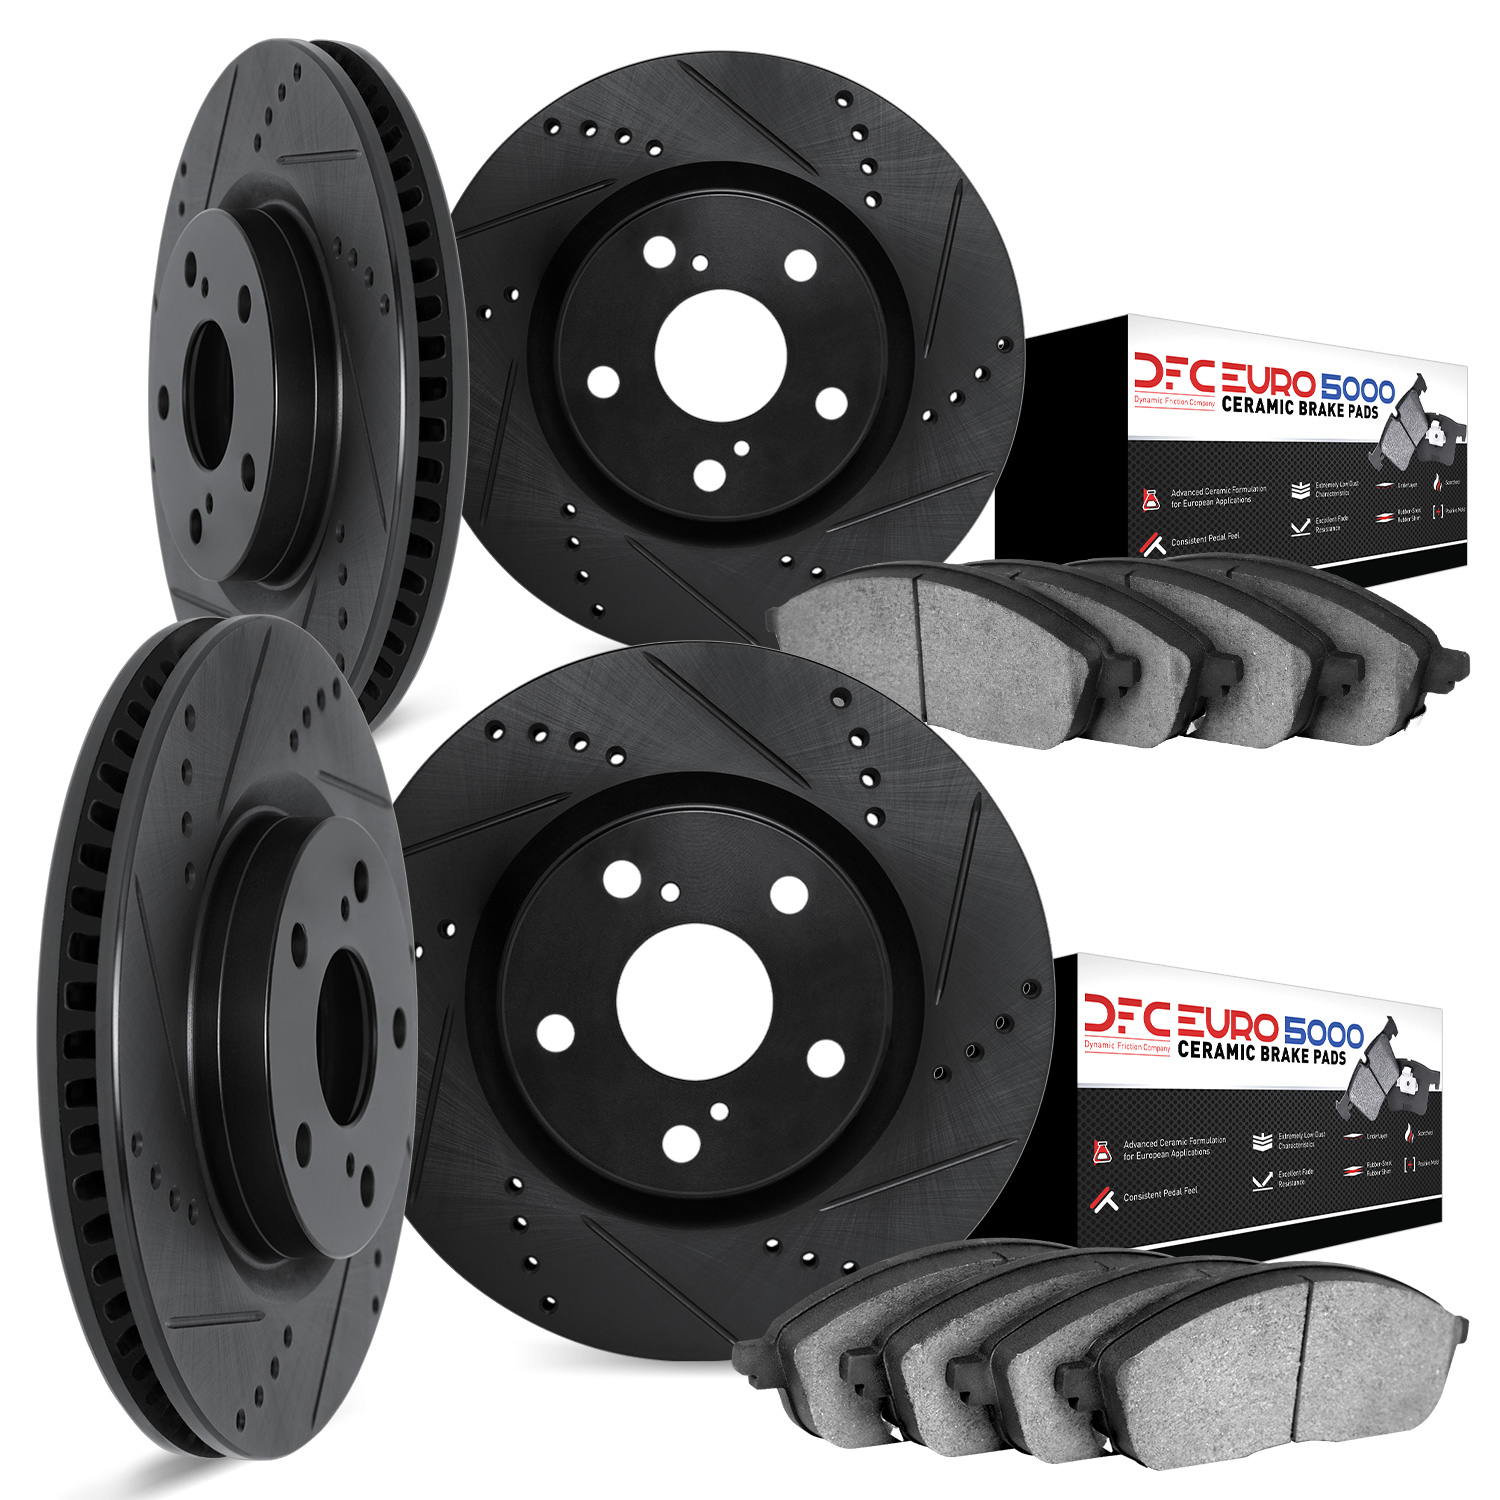 8604-31006 Drilled/Slotted Brake Rotors w/5000 Euro Ceramic Brake Pads Kit [Black], 1988-1994 BMW, Position: Front and Rear